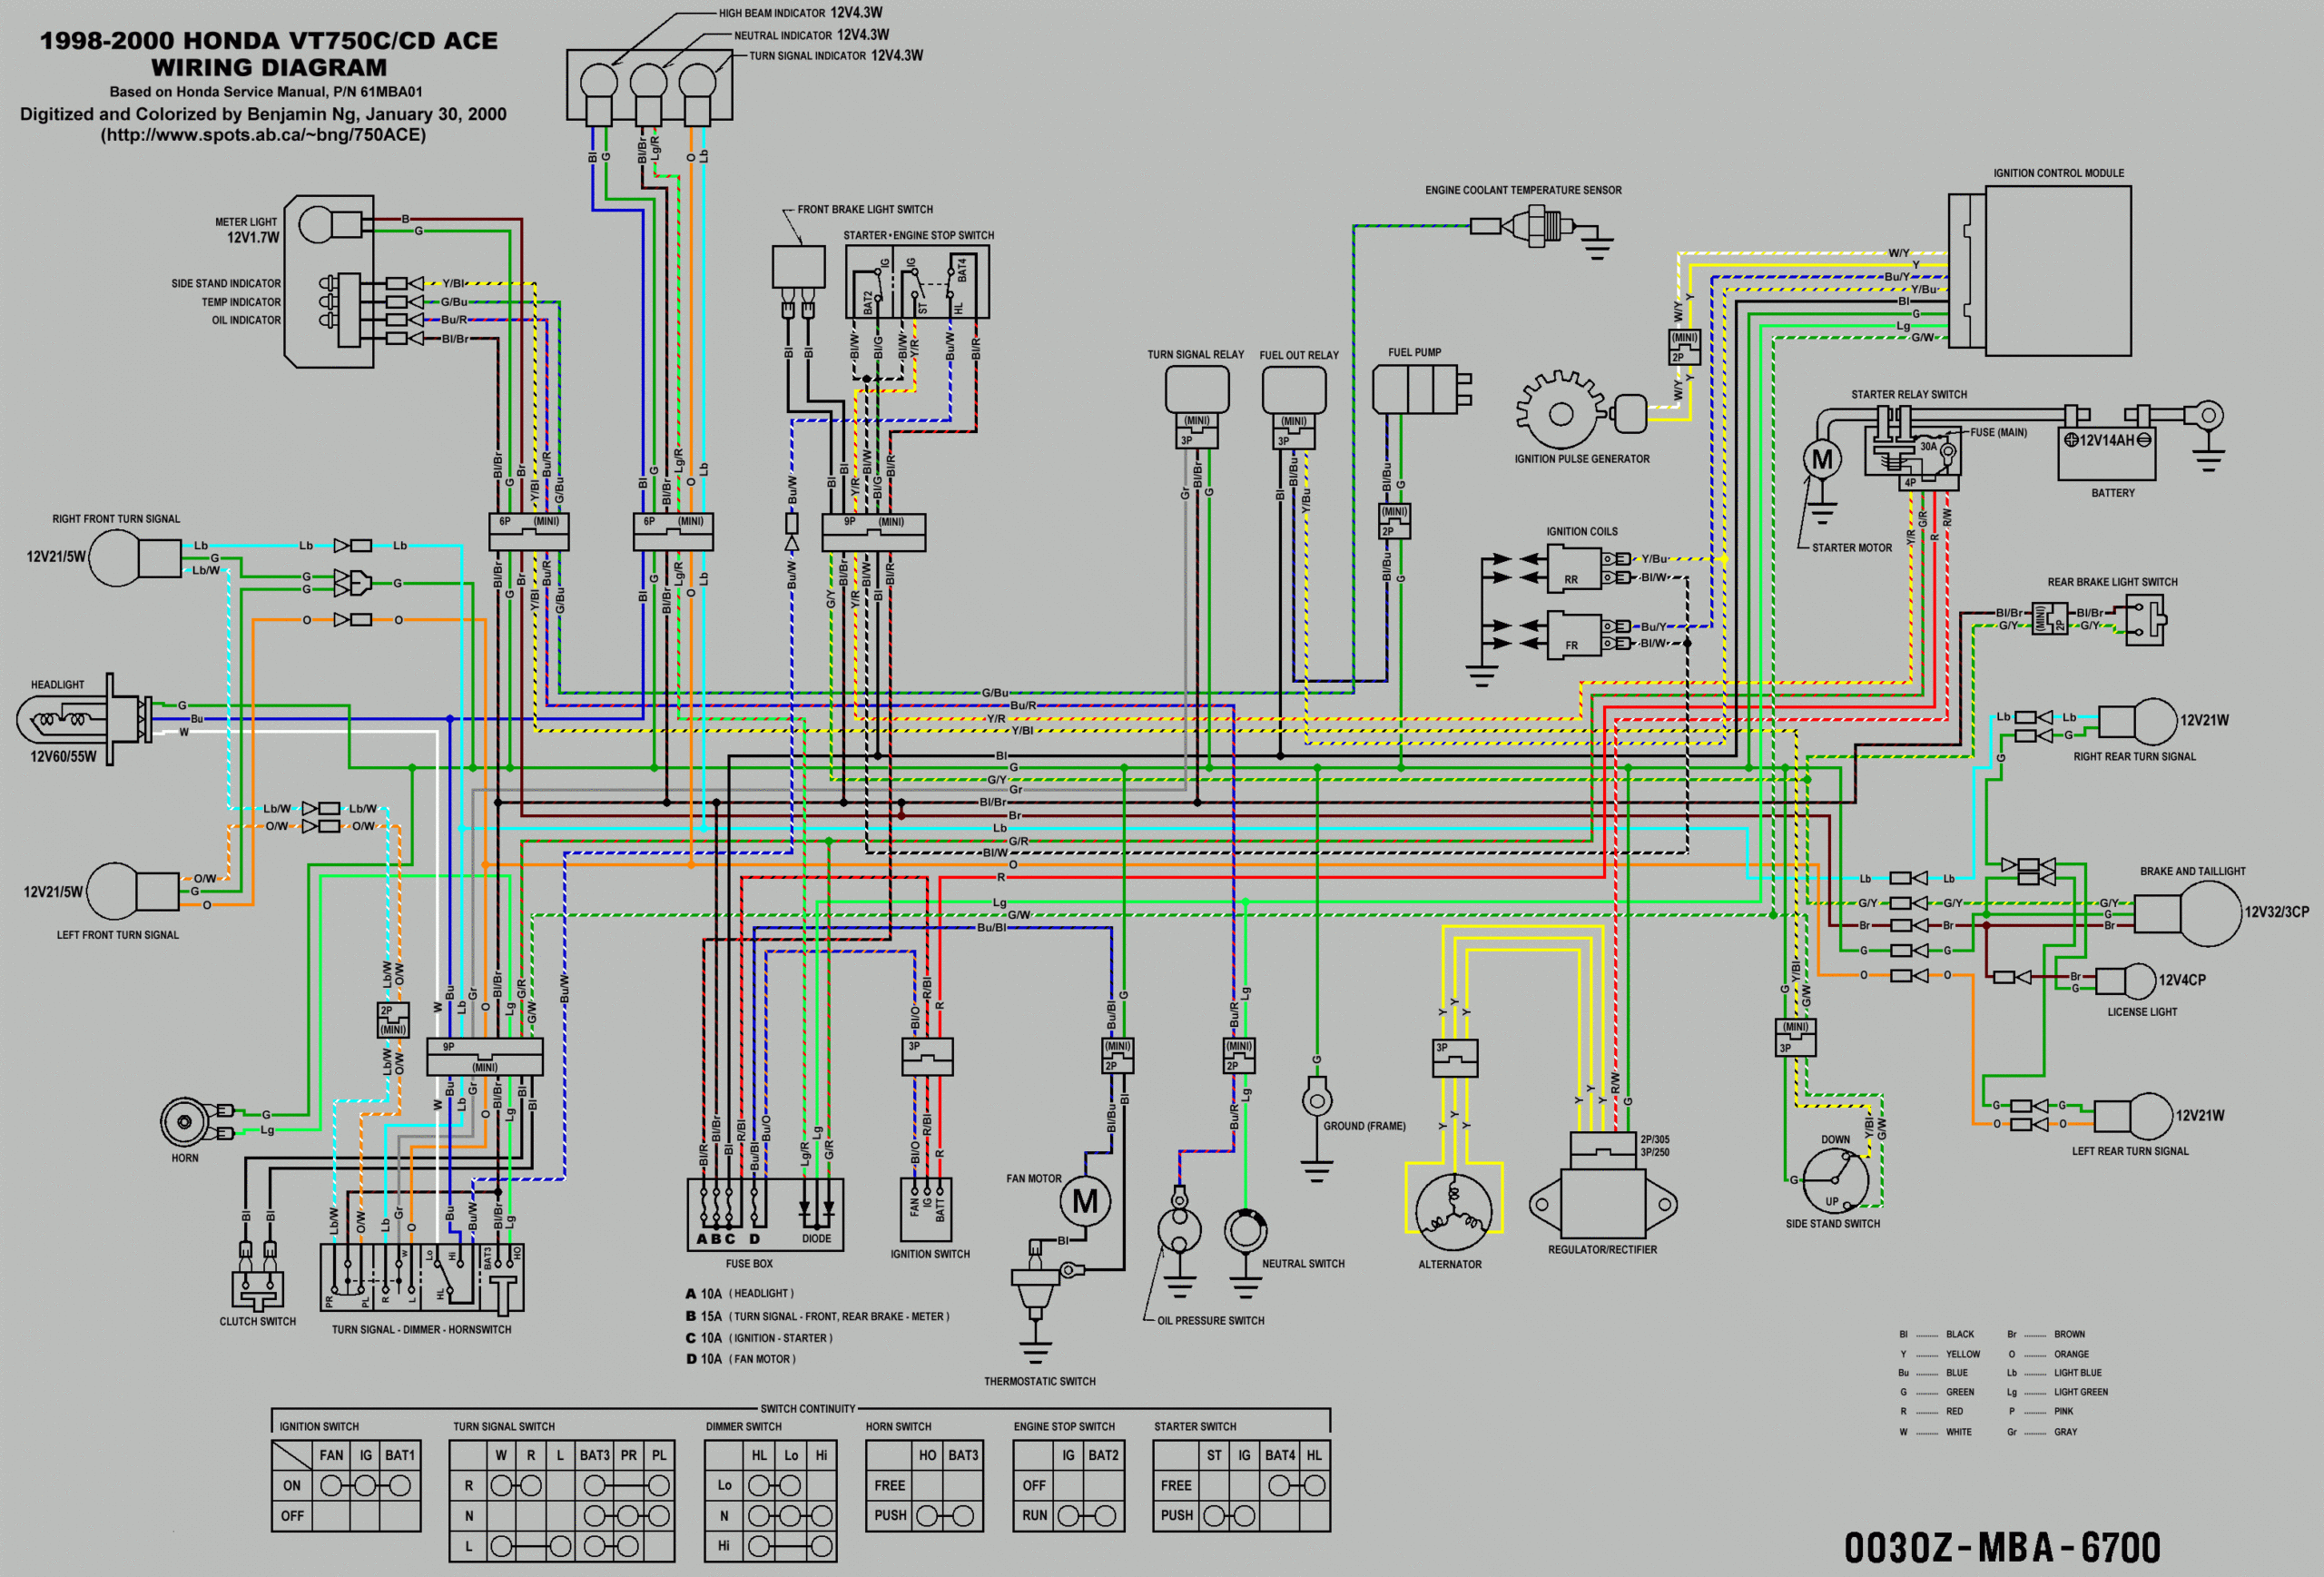 Dan s Motorcycle Various Wiring Systems And Diagrams 